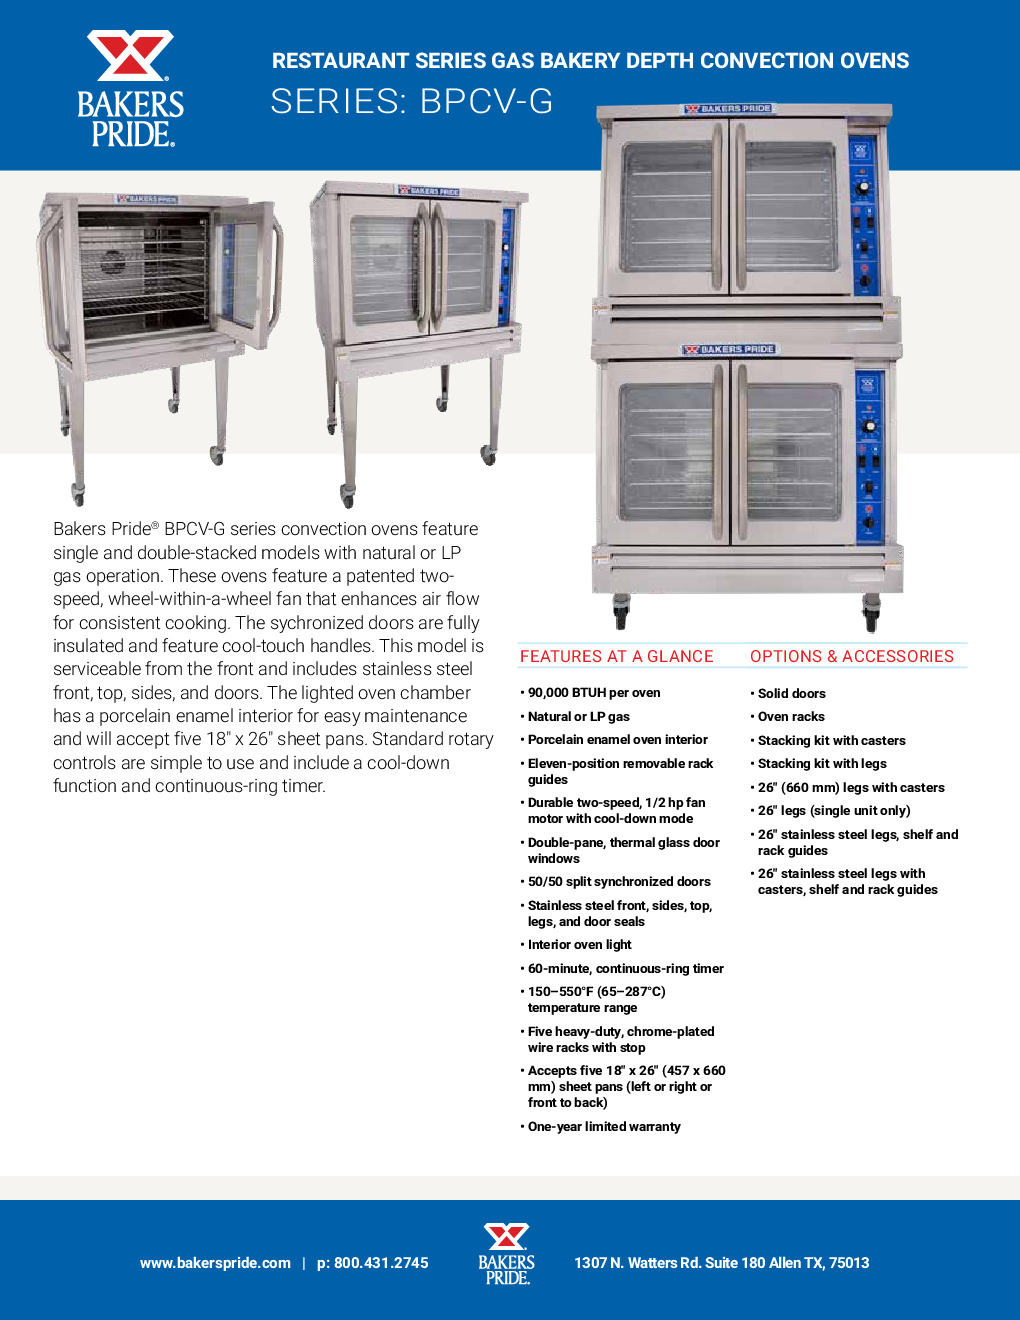 Bakers Pride BPCV-G1 Gas Convection Oven